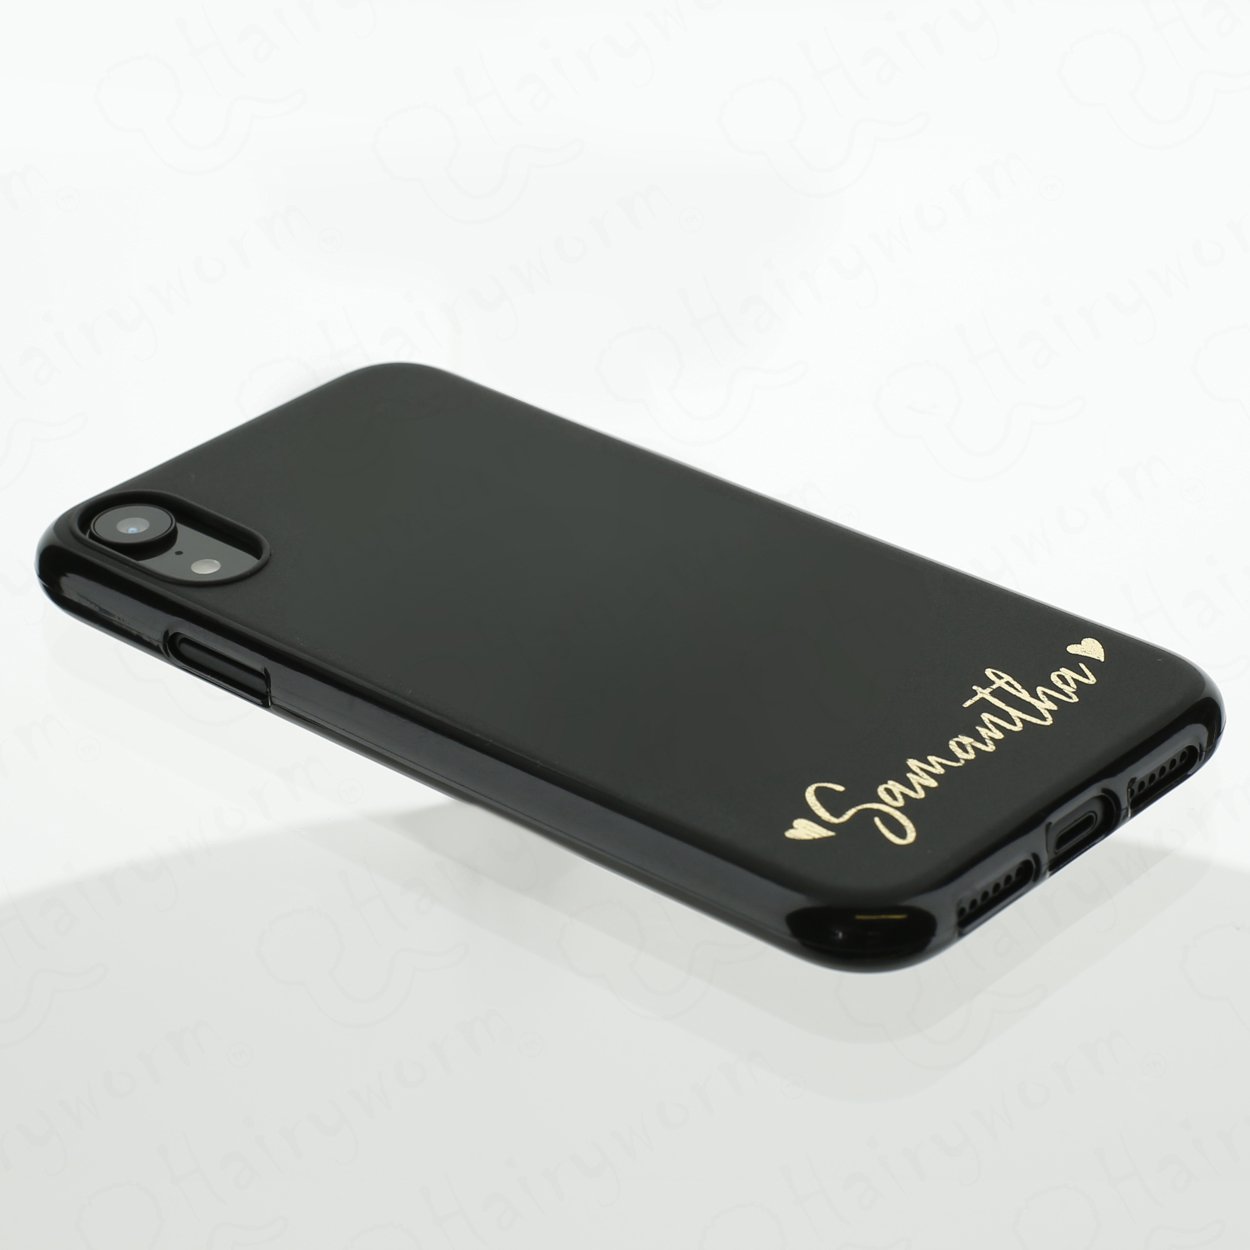 Personalised Nokia Phone Gel Case with Stylish Text and Heart Accented Line